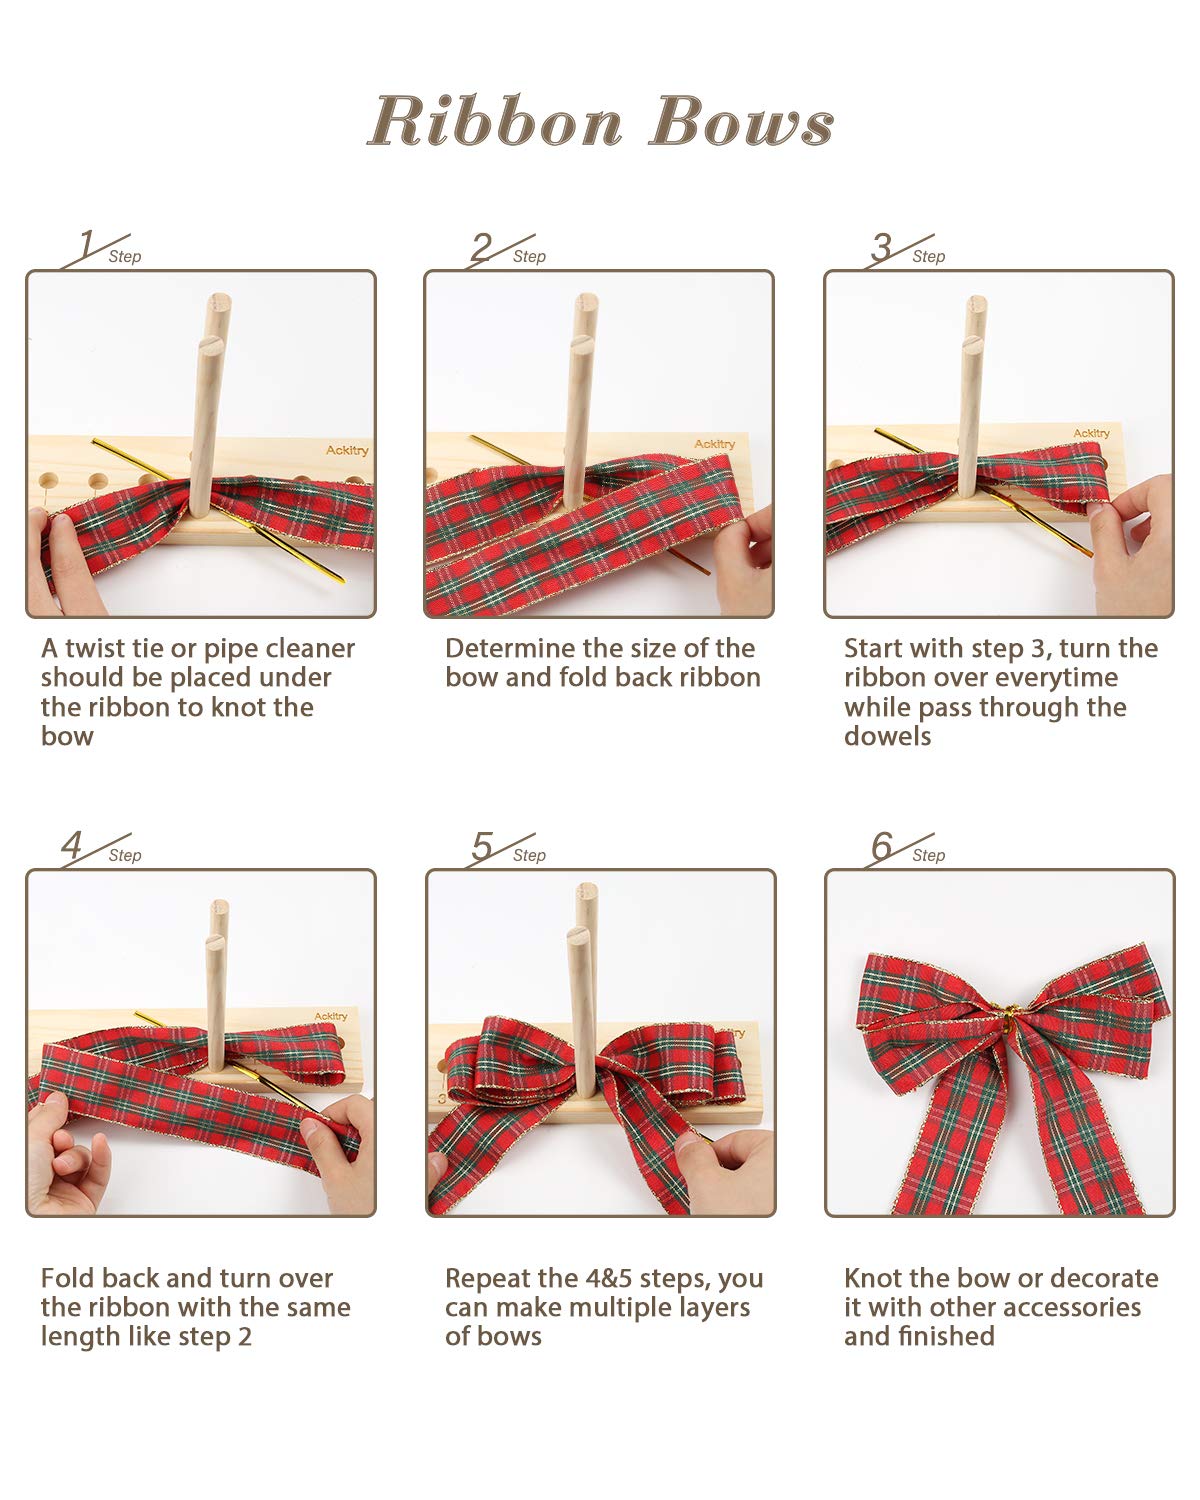 Ackitry 4-in-1 Multipurpose Bow Maker for Ribbon for Wreaths Wooden Double  Sided Bow Making Tool with 2 Bundles Twist Ties for Making Bows, DIY Crafts  Bows Party Decorations Holiday Wreaths